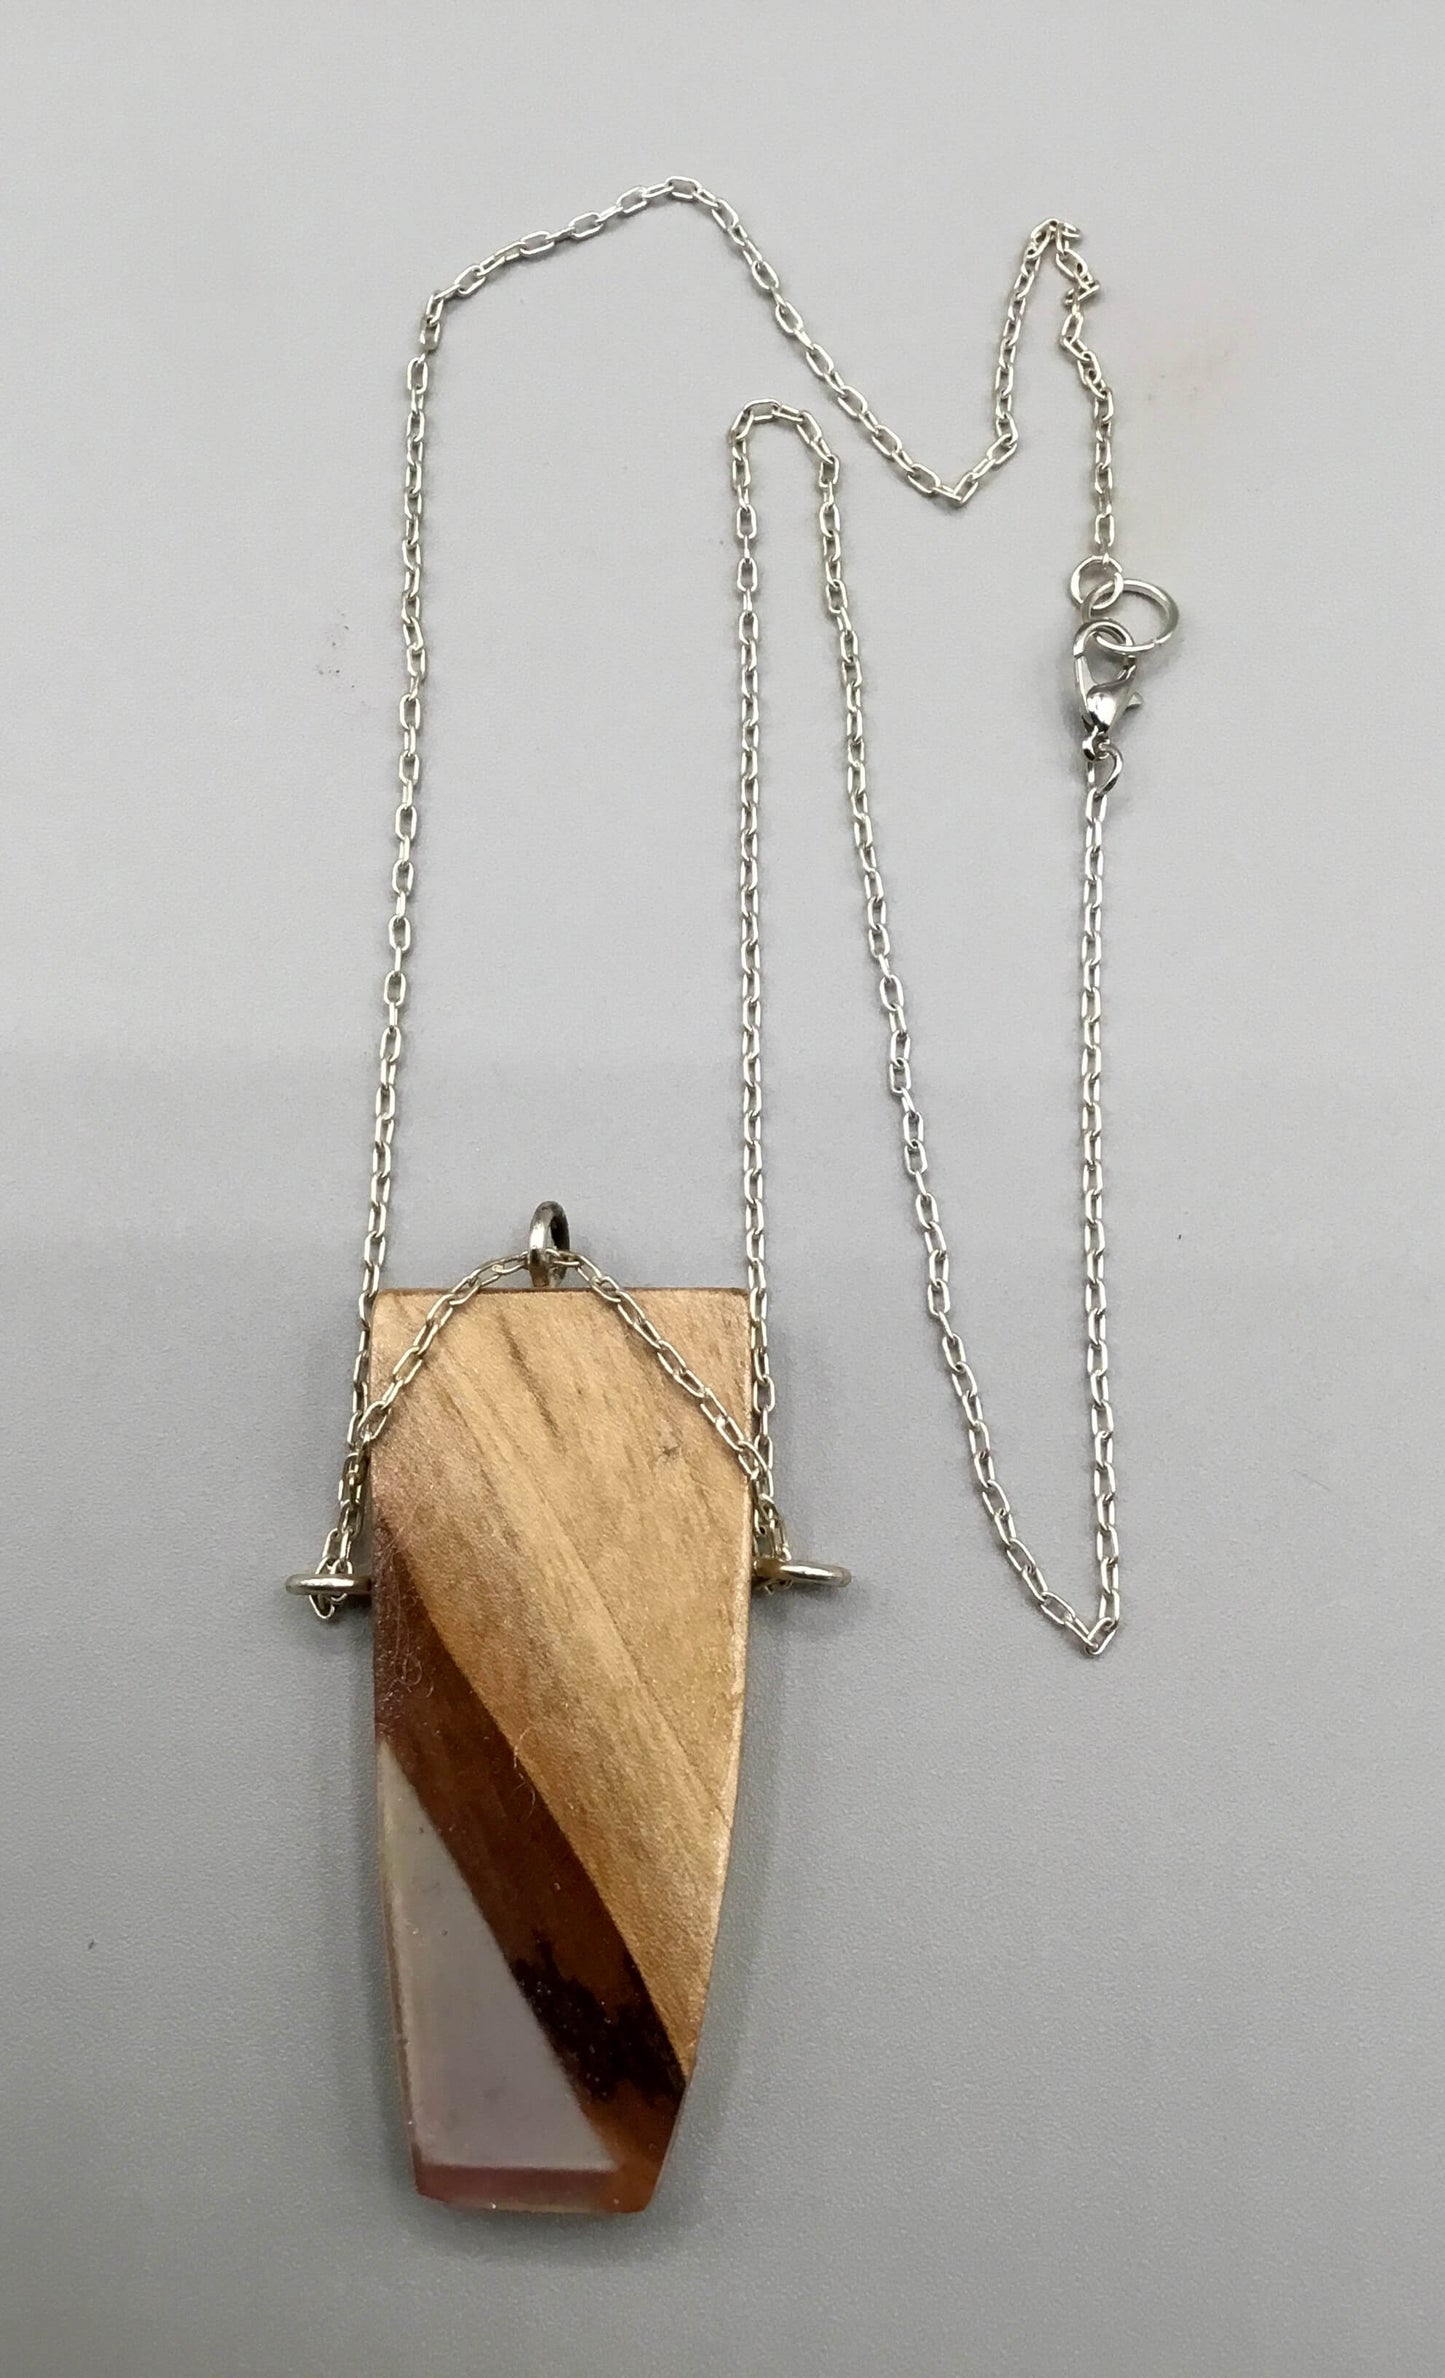 Resin and Wood Necklaces